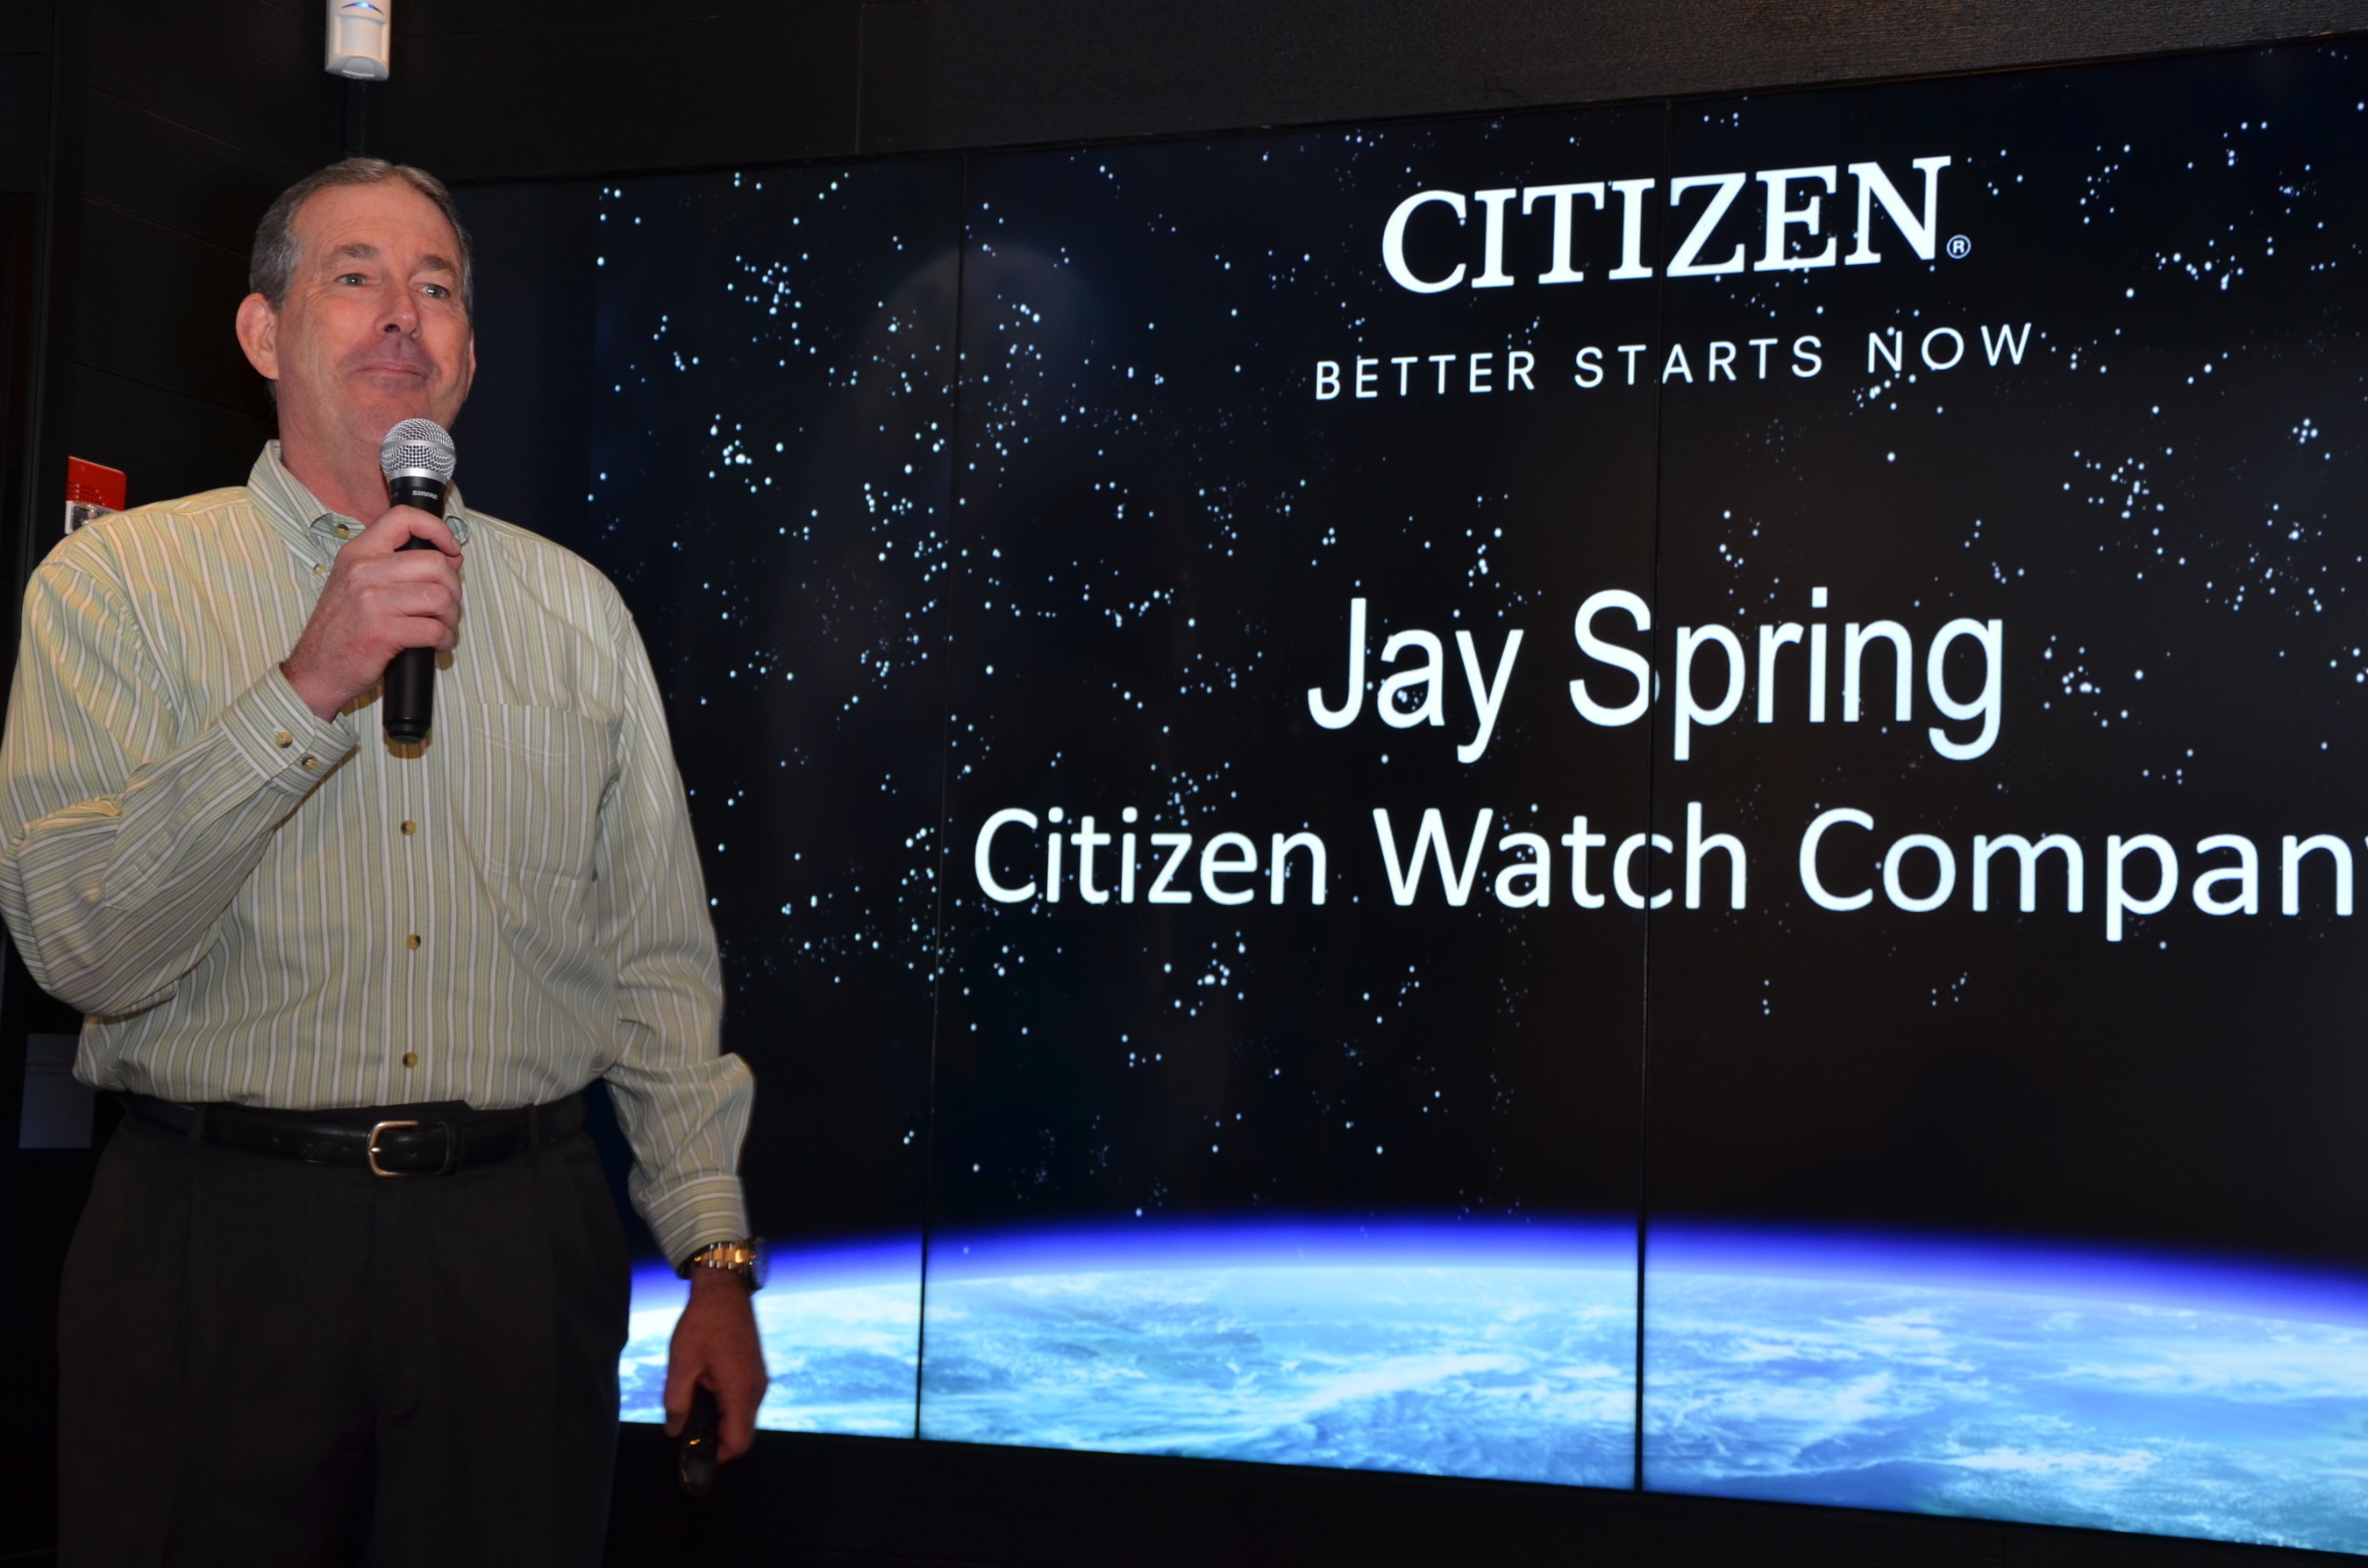 Jay Spring, Vice President of Technical Support for Citizen Watch, spoke to us about the fusion of beauty and technology as exemplified by our Citizen Timepieces.